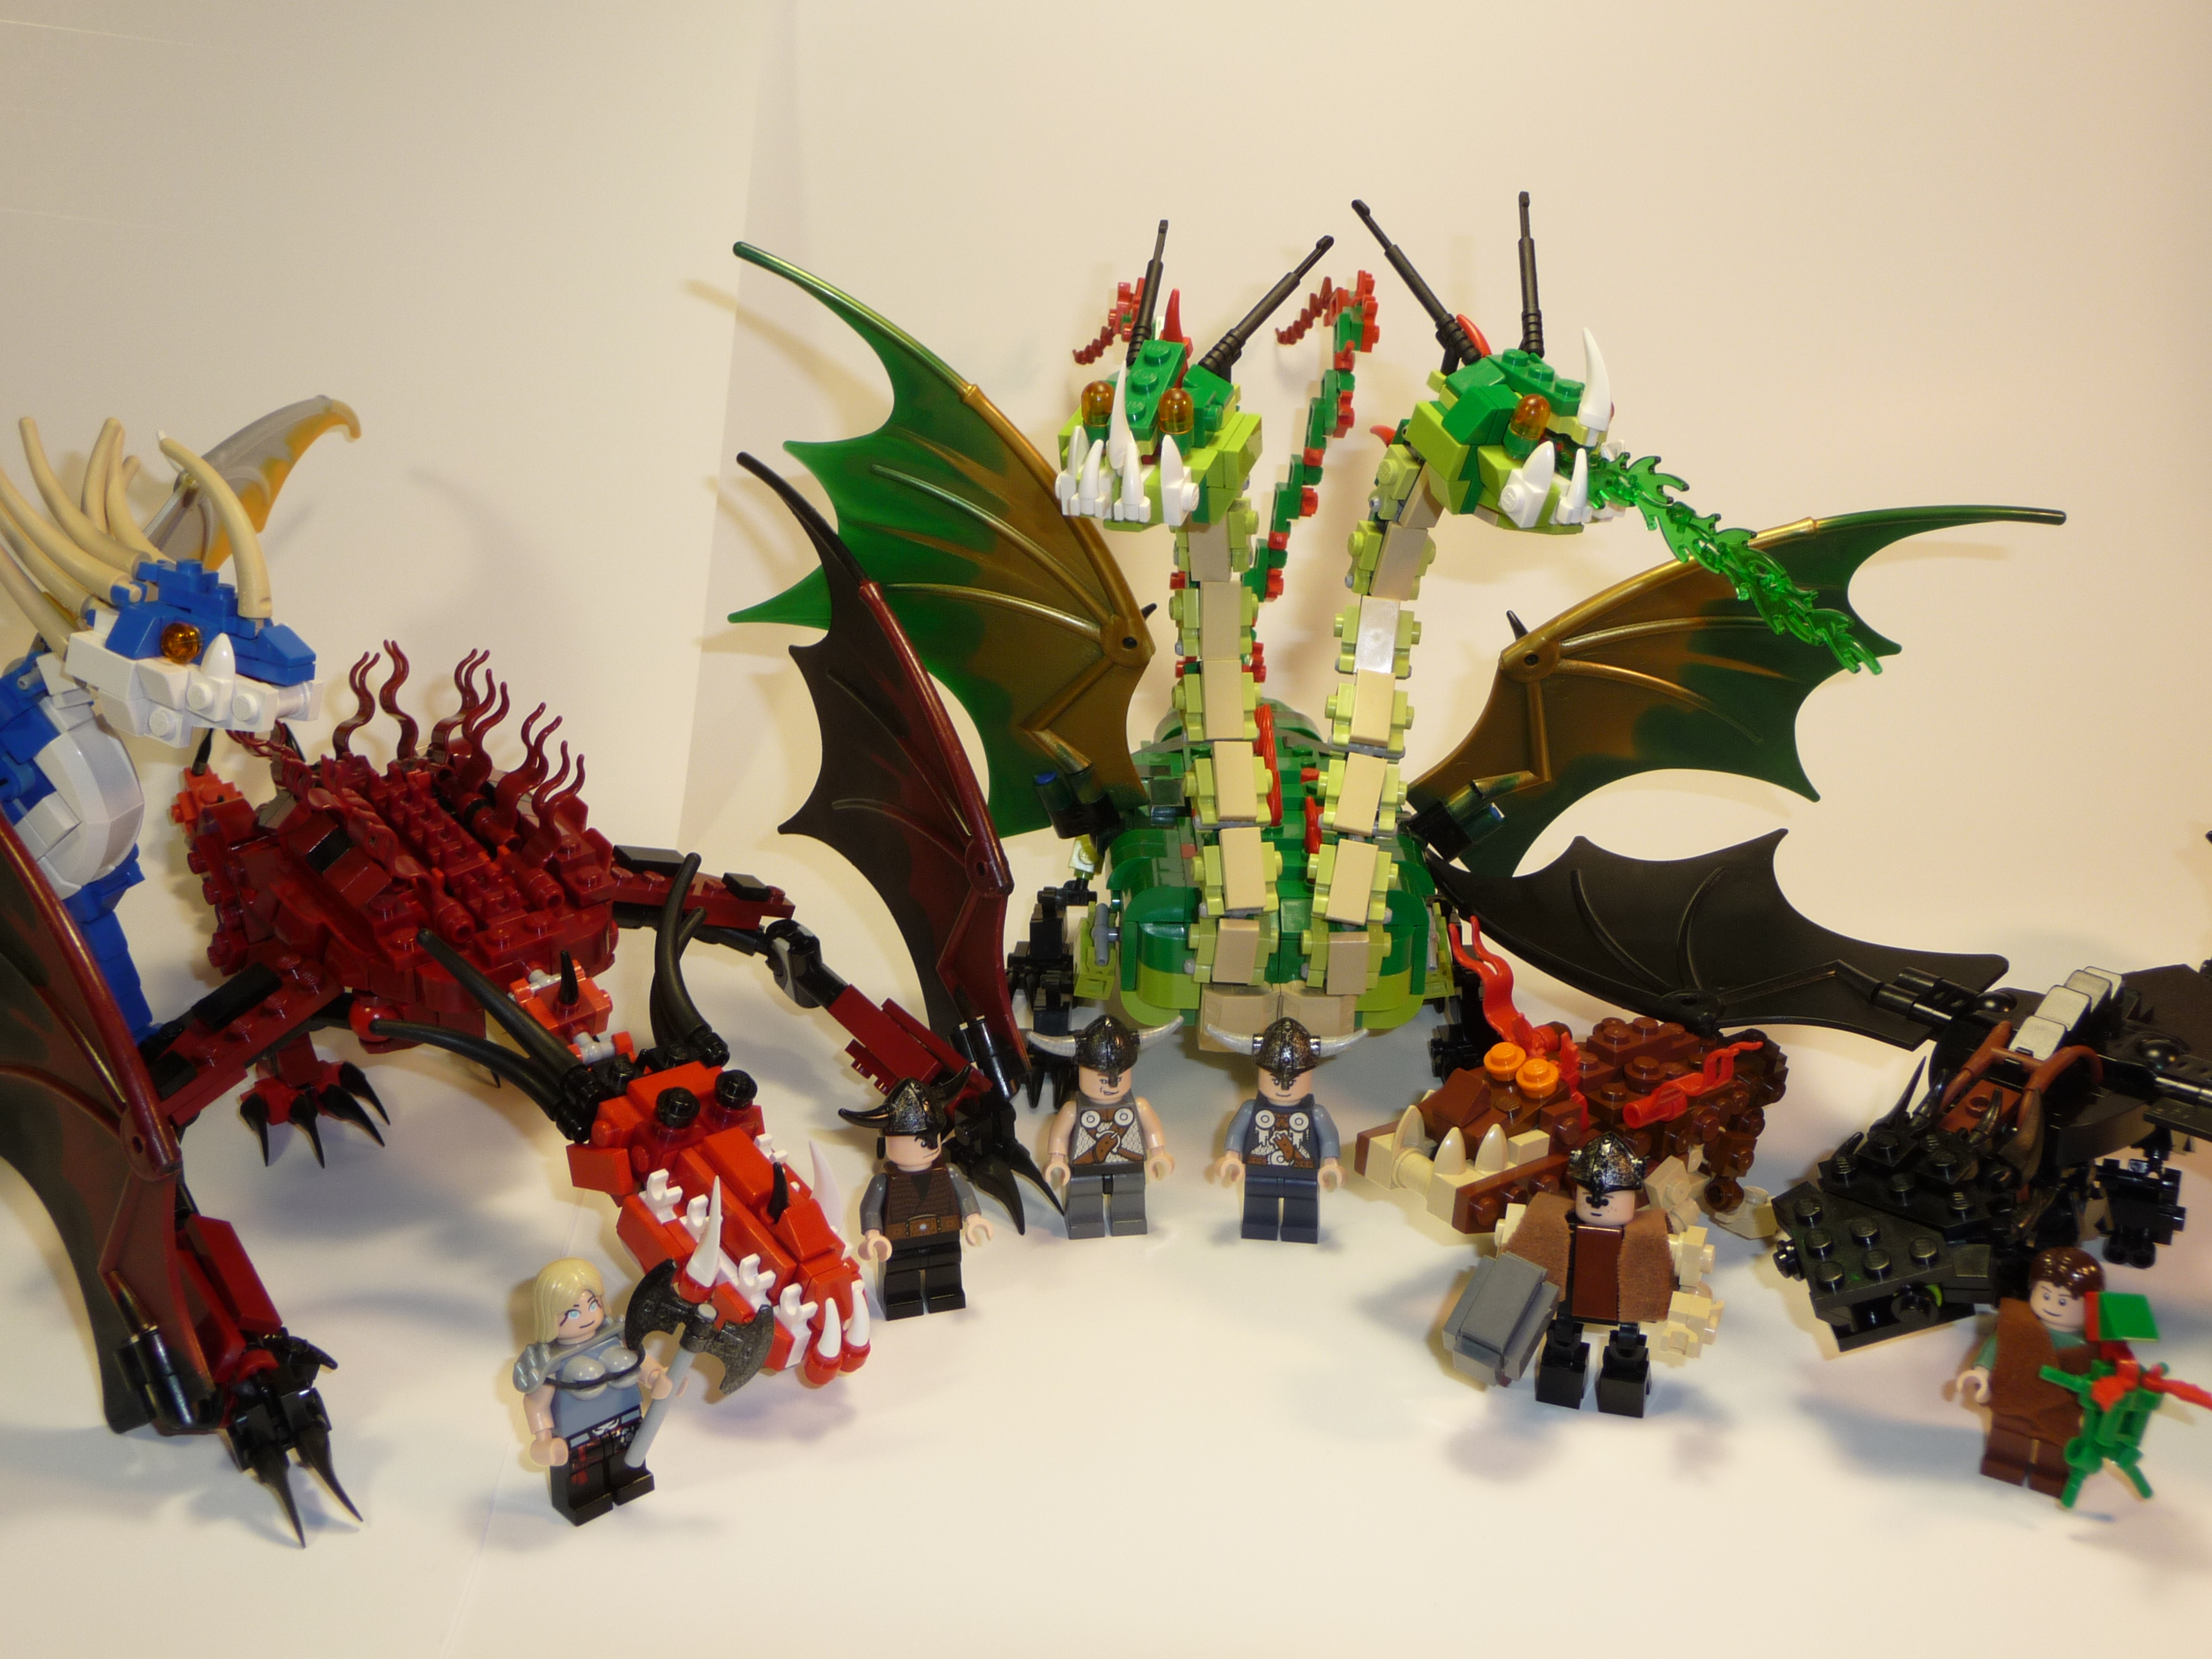 How to Train Your Dragon or not, those things are awesome